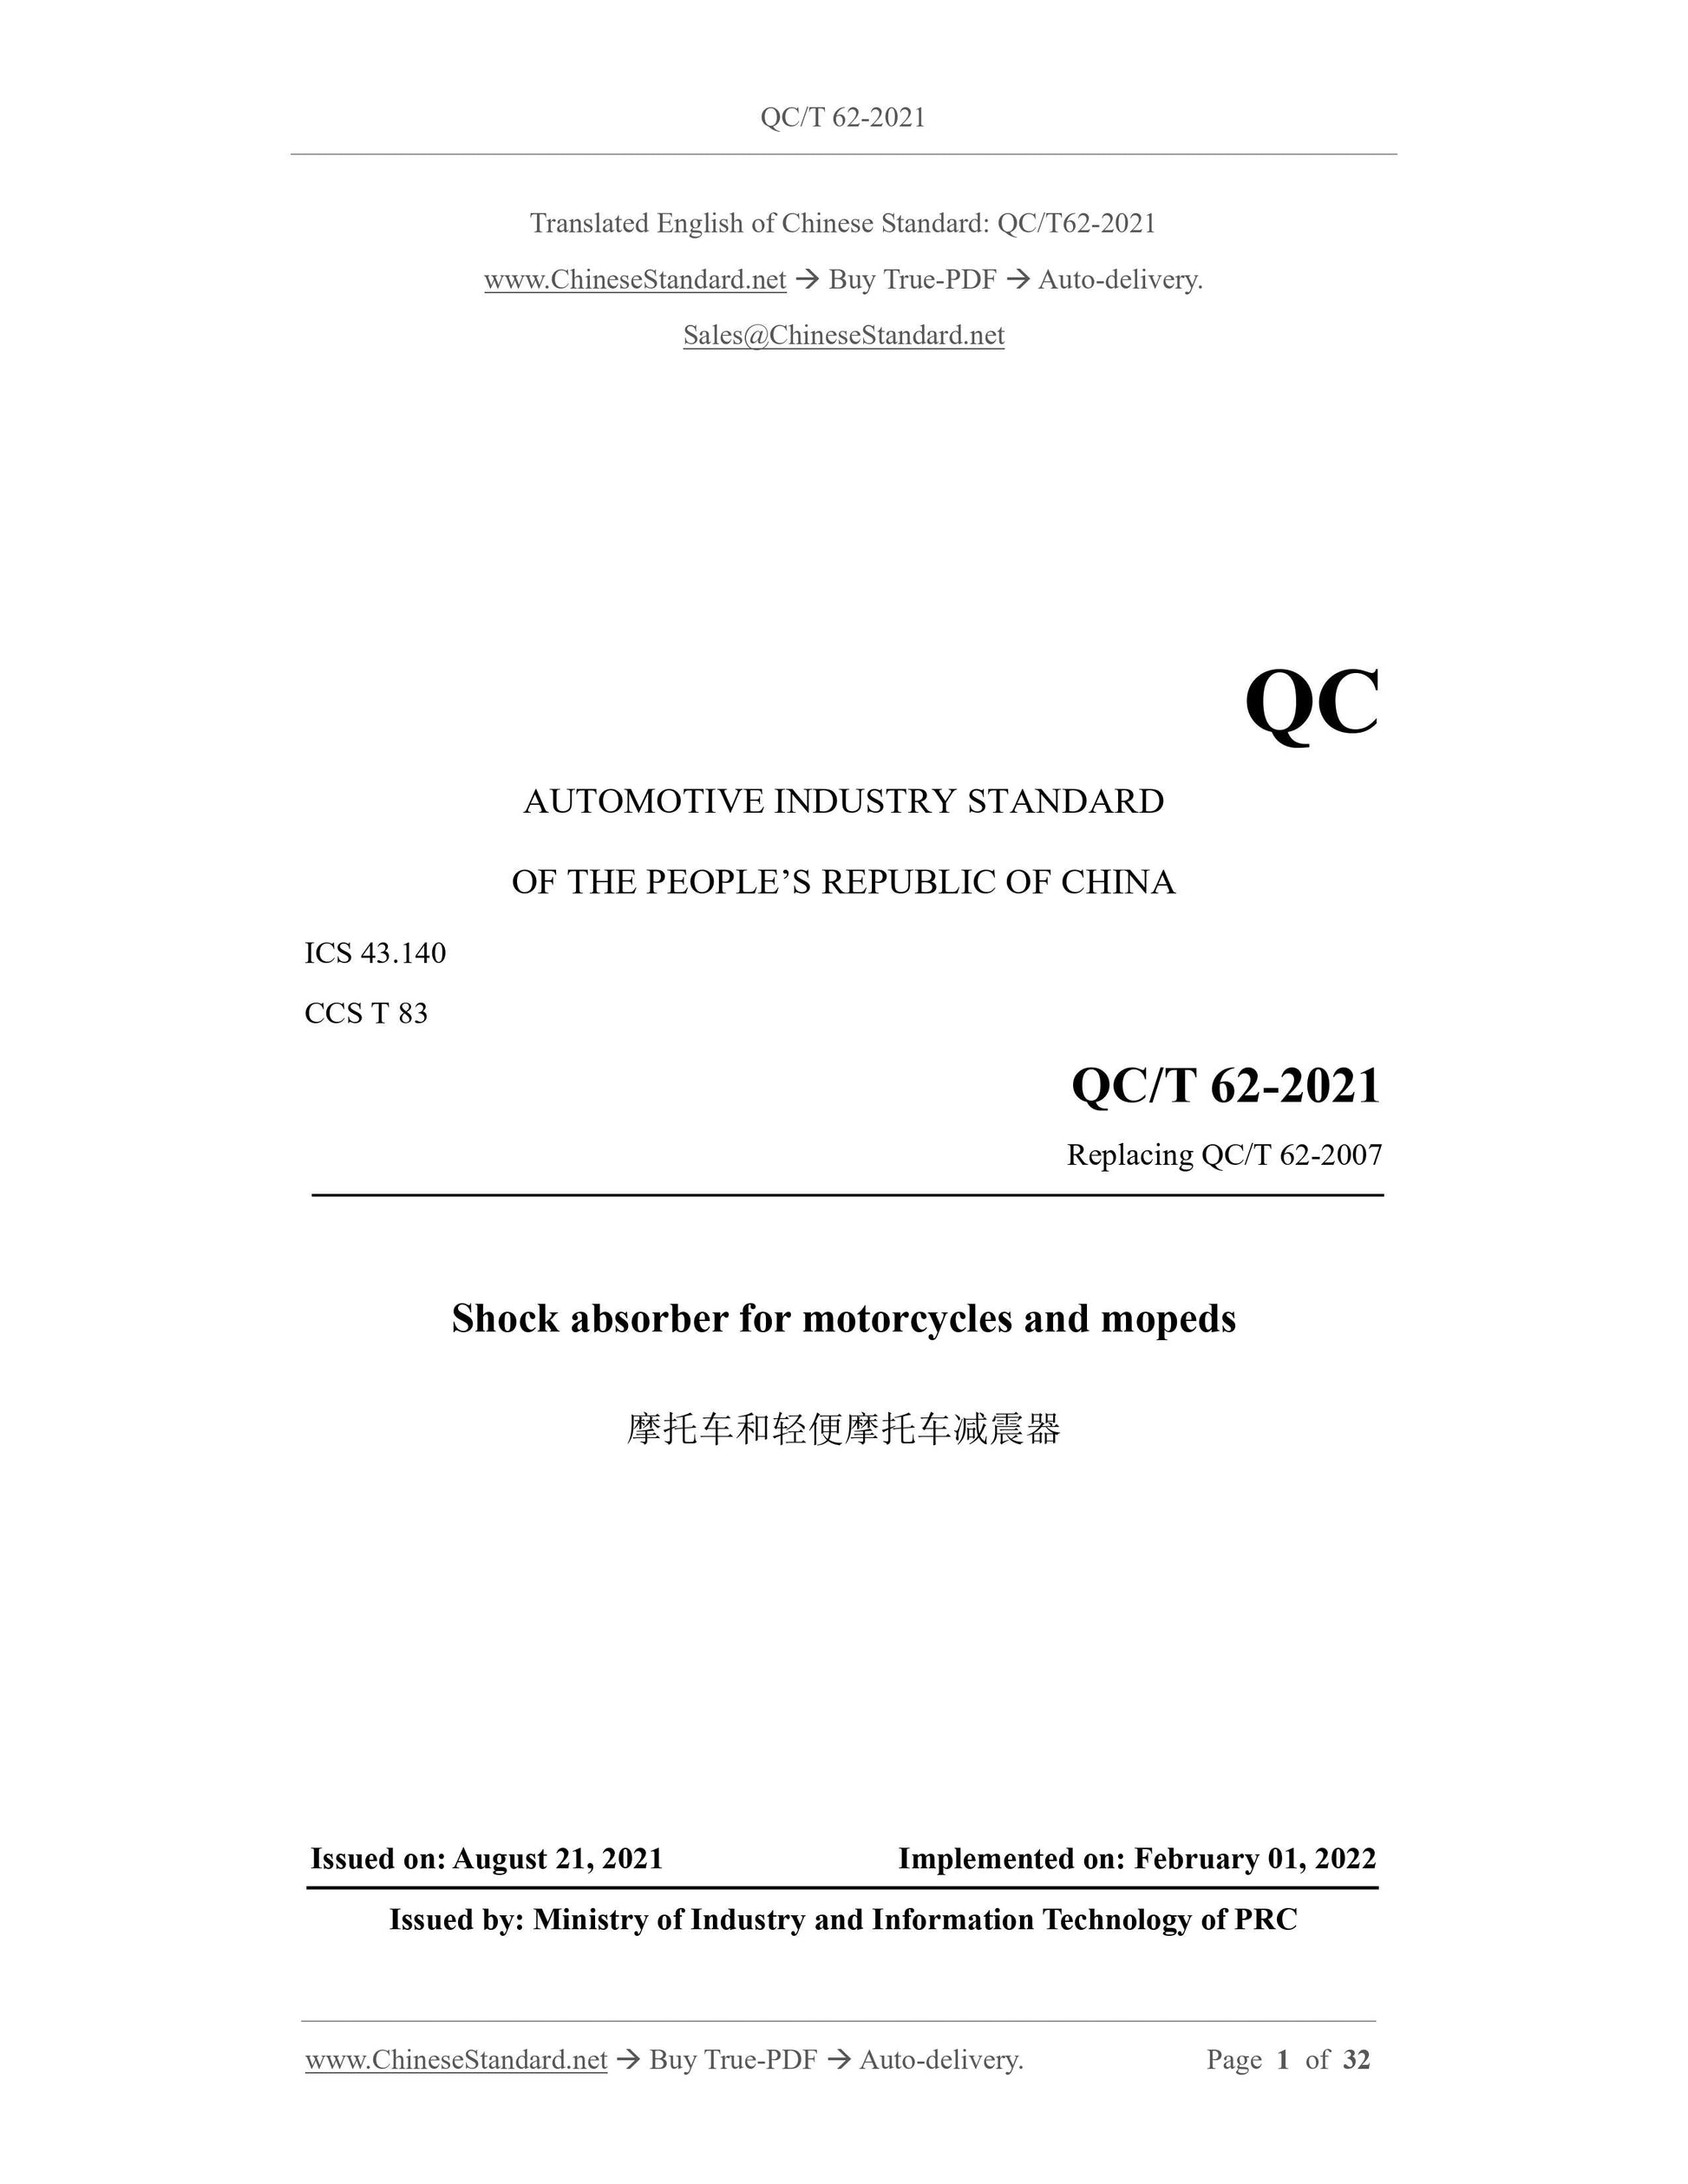 QC/T 62-2021 Page 1